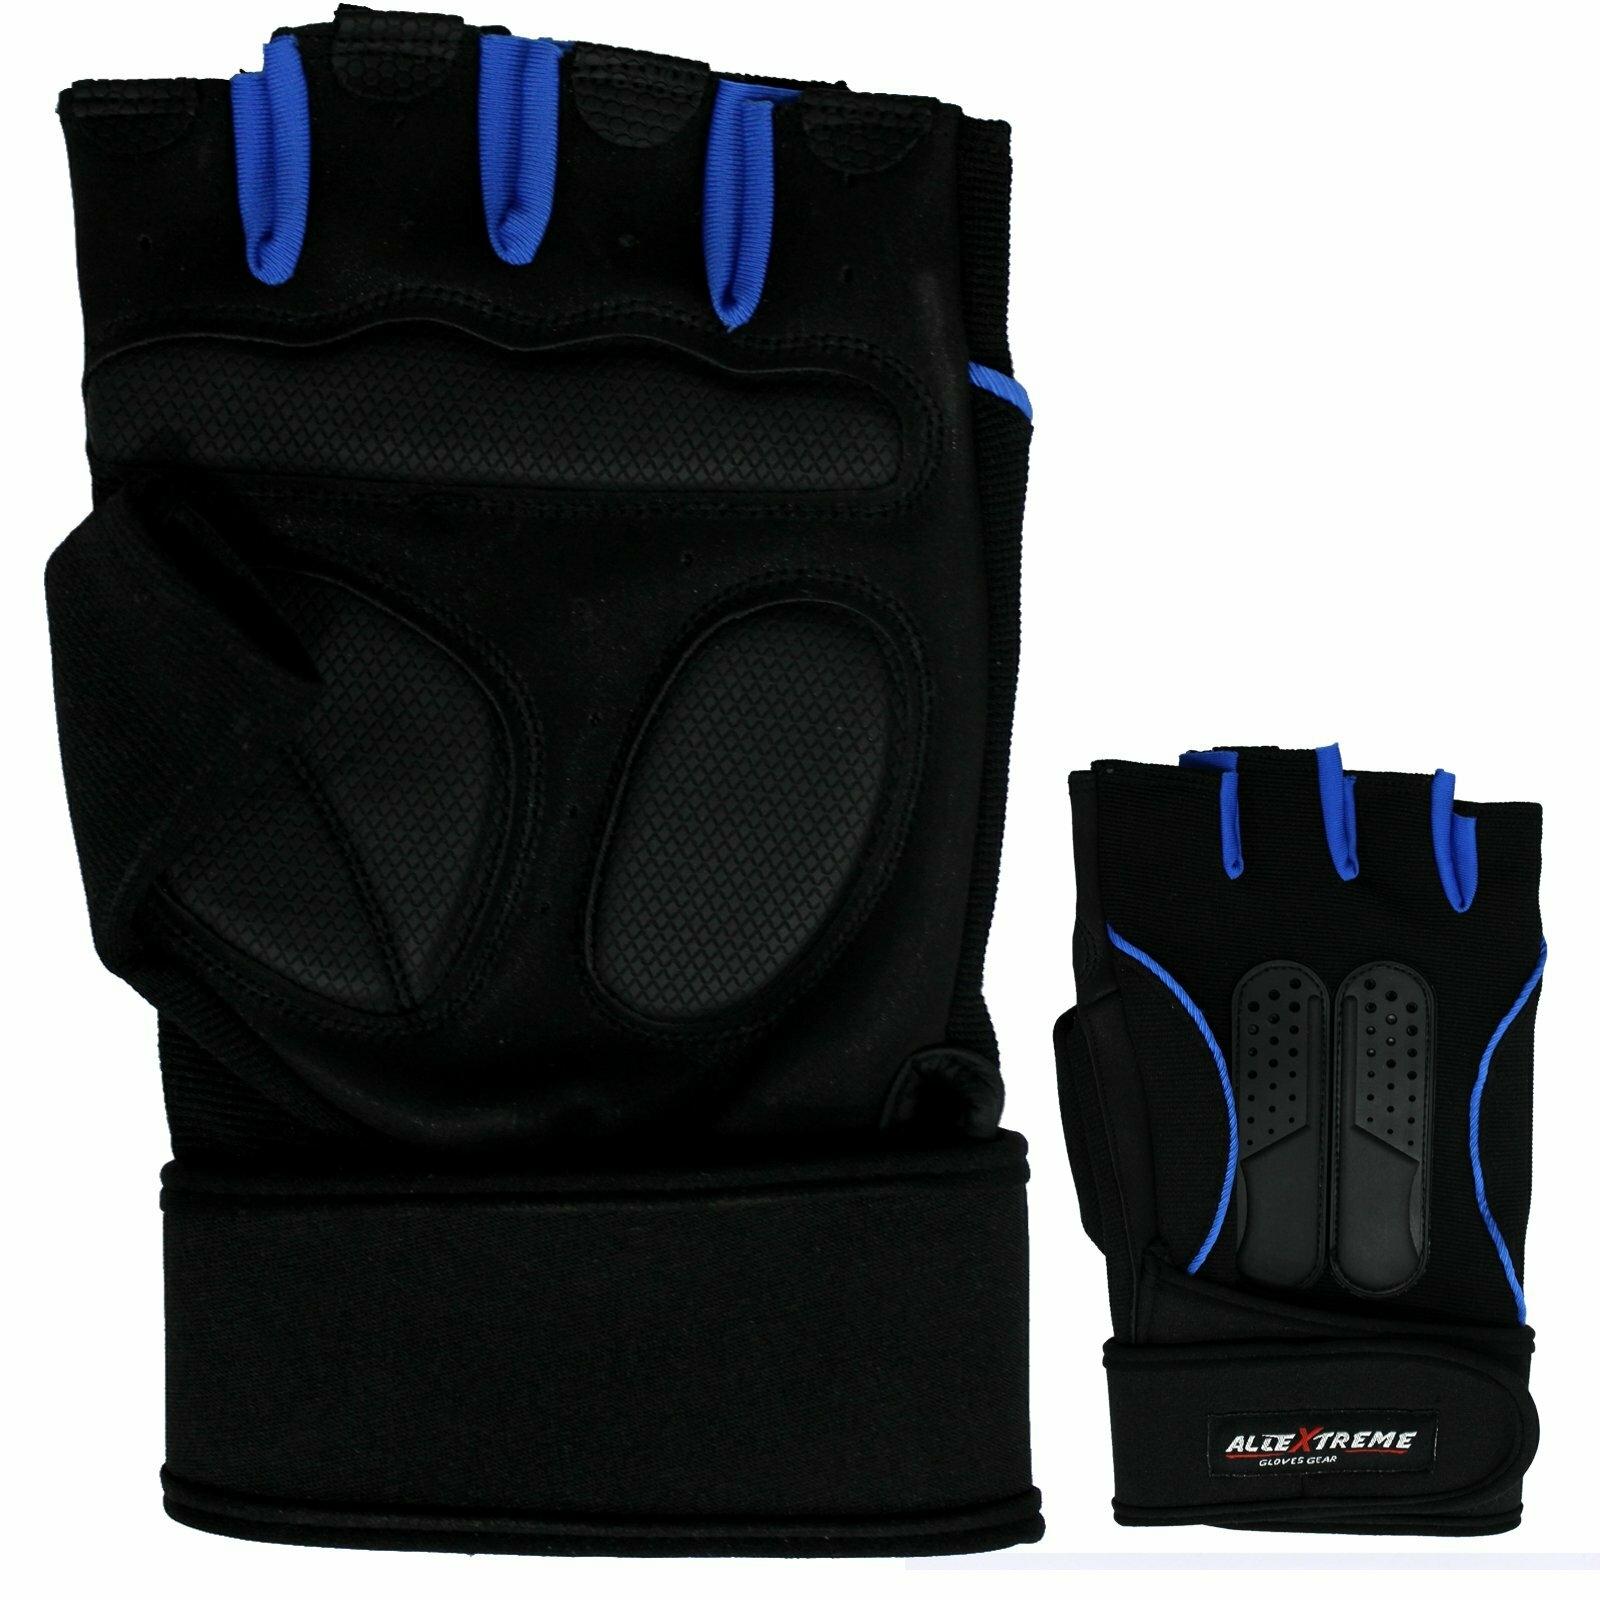 ThreeH Sports Gloves Half Fingers Wear Rsistant Sports Gloves GL06 